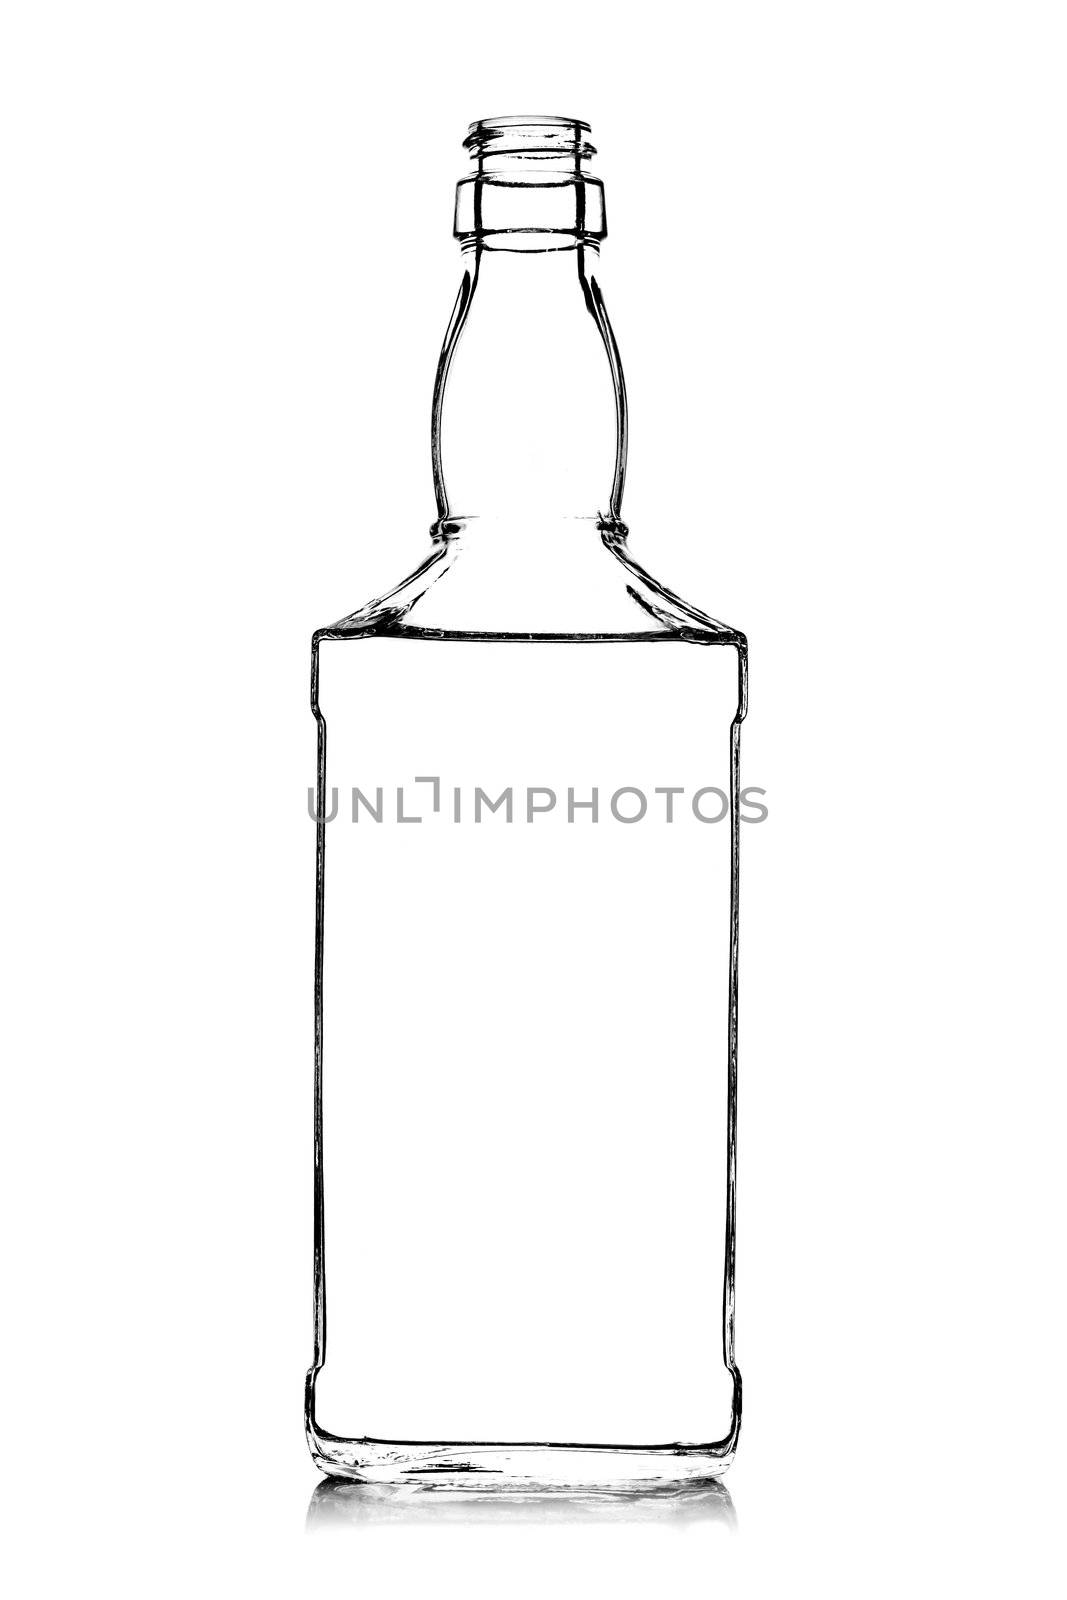 contour of an alcohol bottle, against white